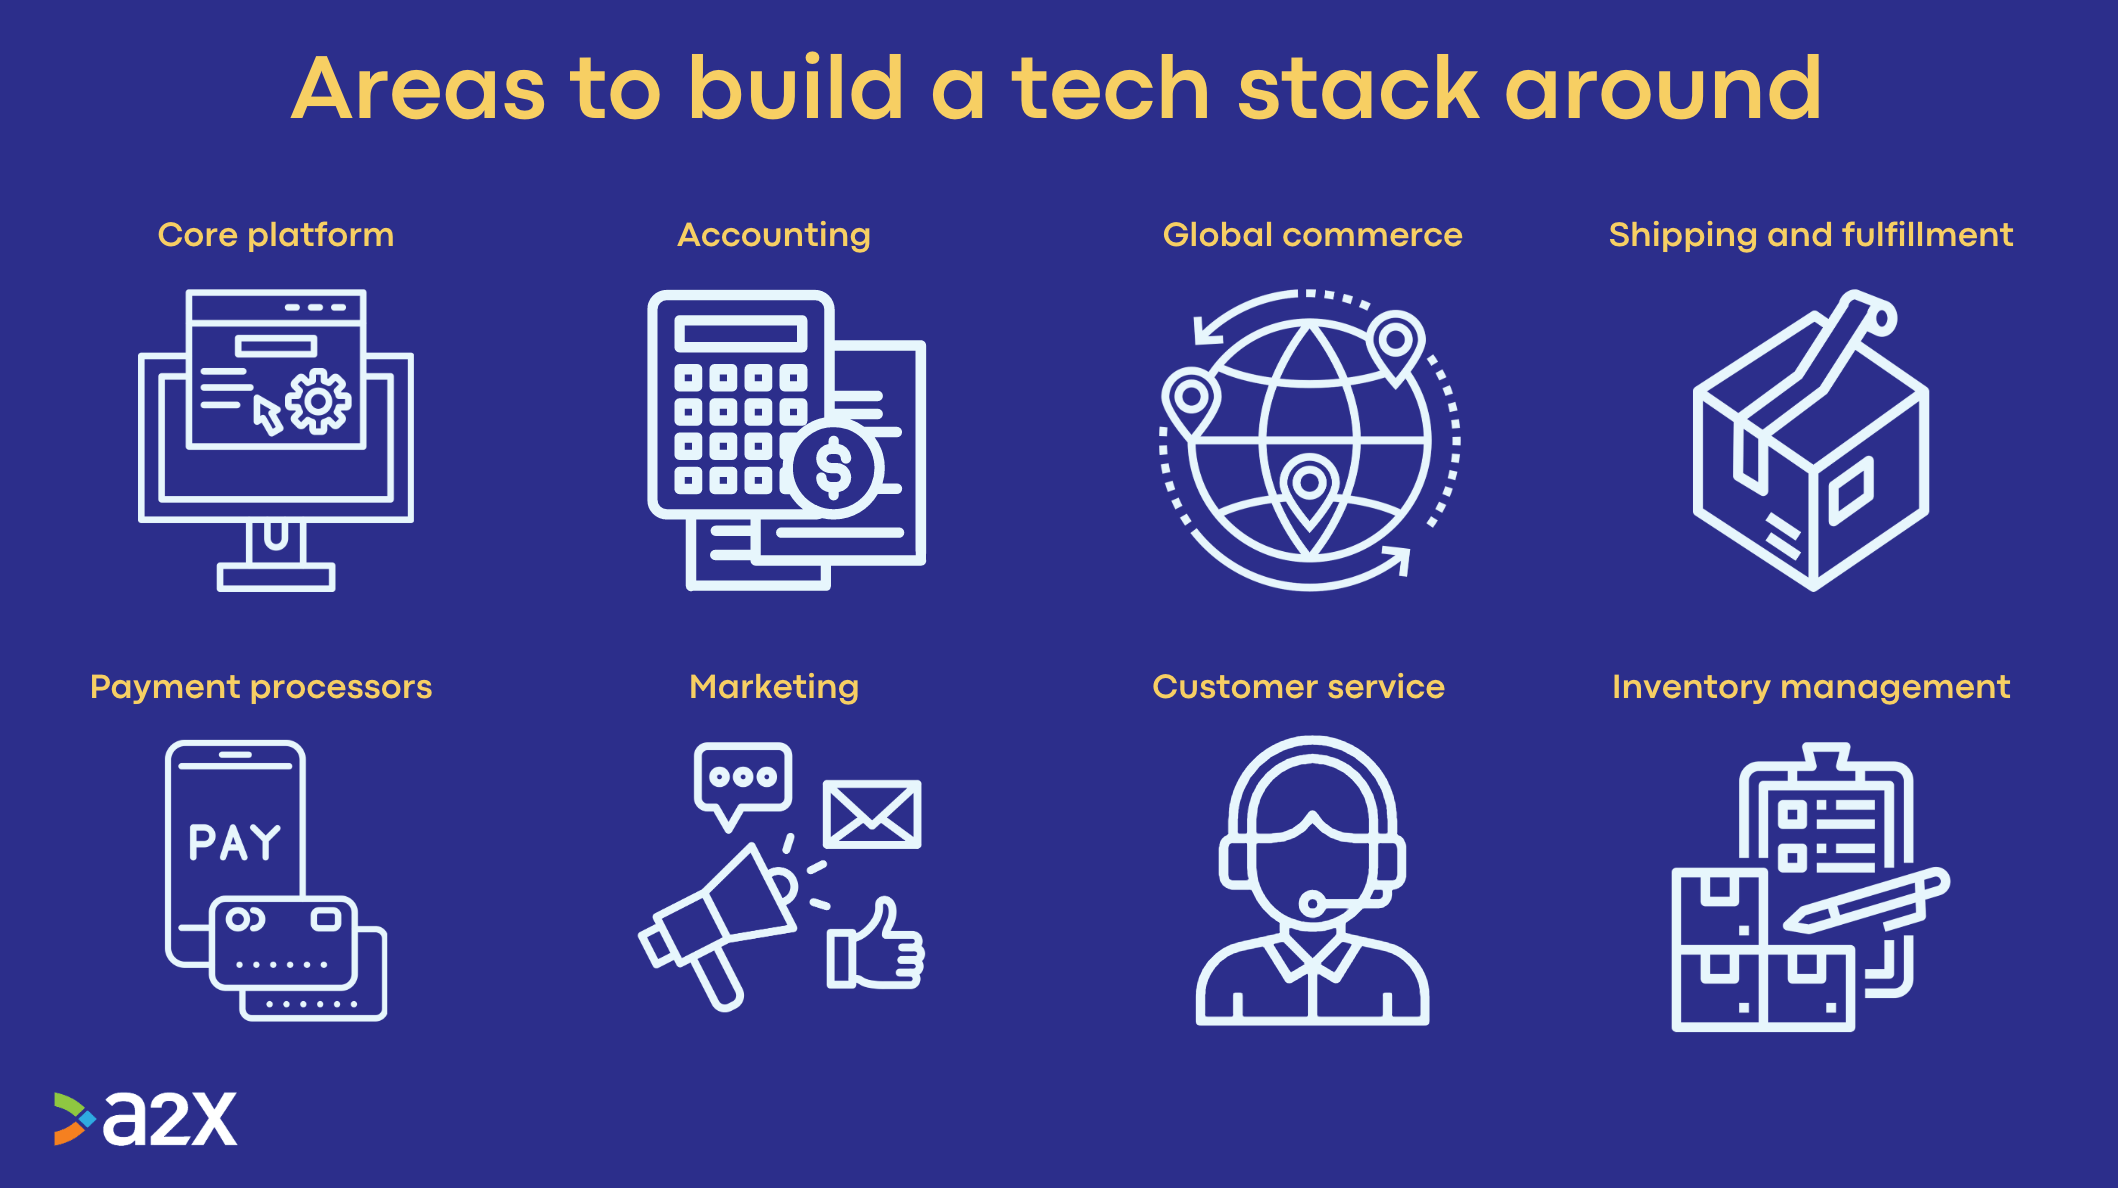 a graphic with 8 icons of areas to build a tech stack around: core platform, accounting, global commerce, shipping and fulfillment, payment processors, marketing, customer service, and inventory management